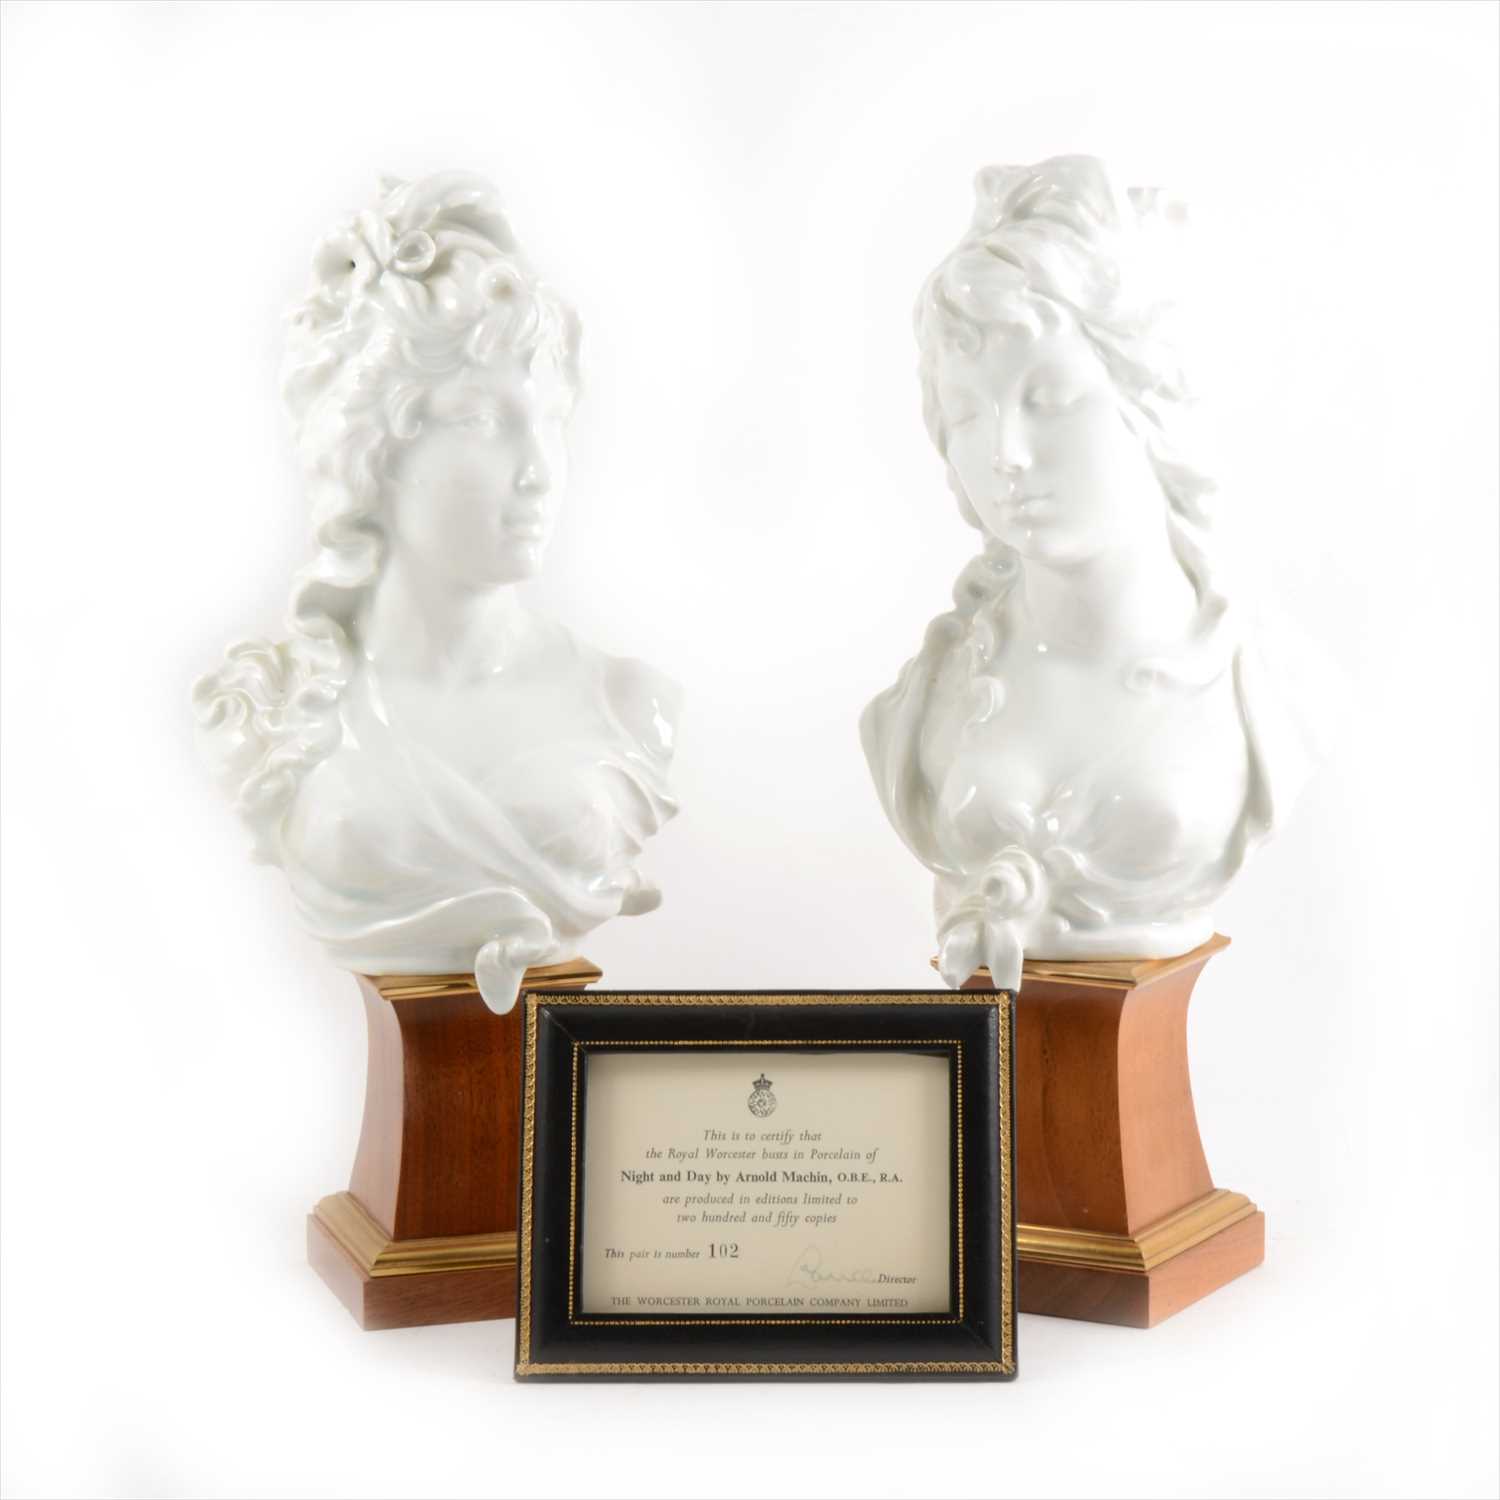 Lot 12 - A pair of Royal Worcester glazed busts modelled by Arnold Machin O.B.E.,.  R.A. "Night and Day."